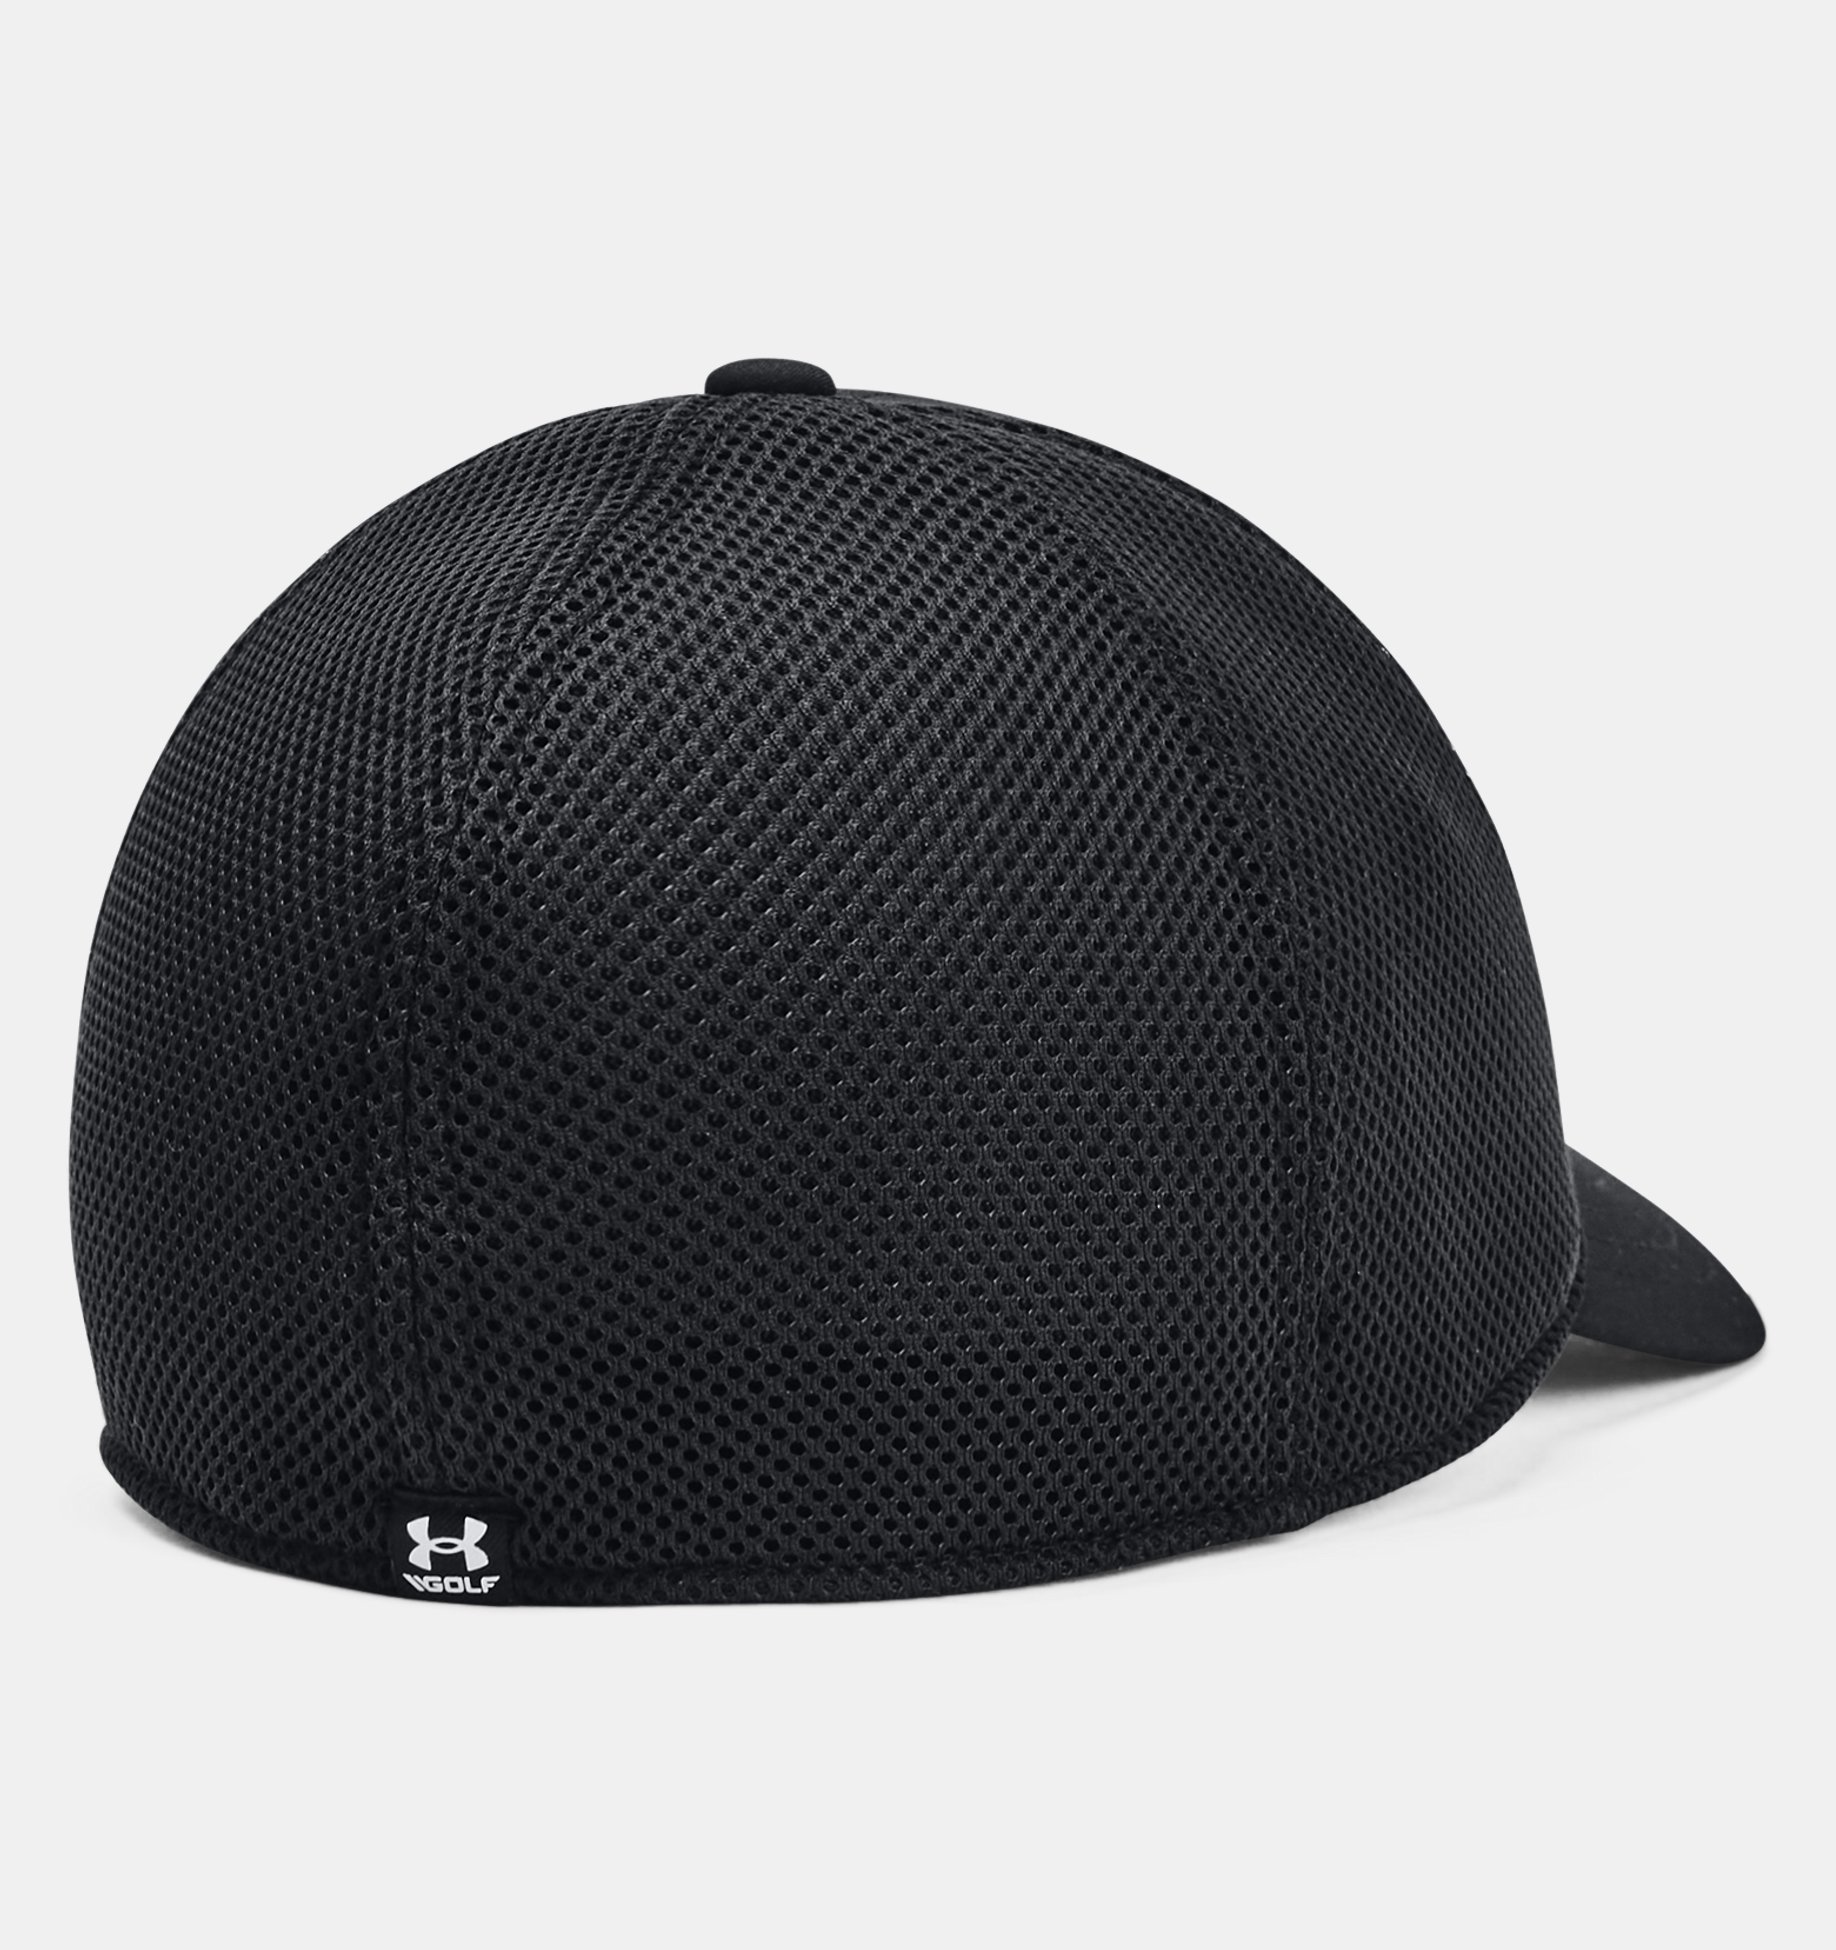 Men's Iso-Chill Driver Mesh Cap | Under Armour